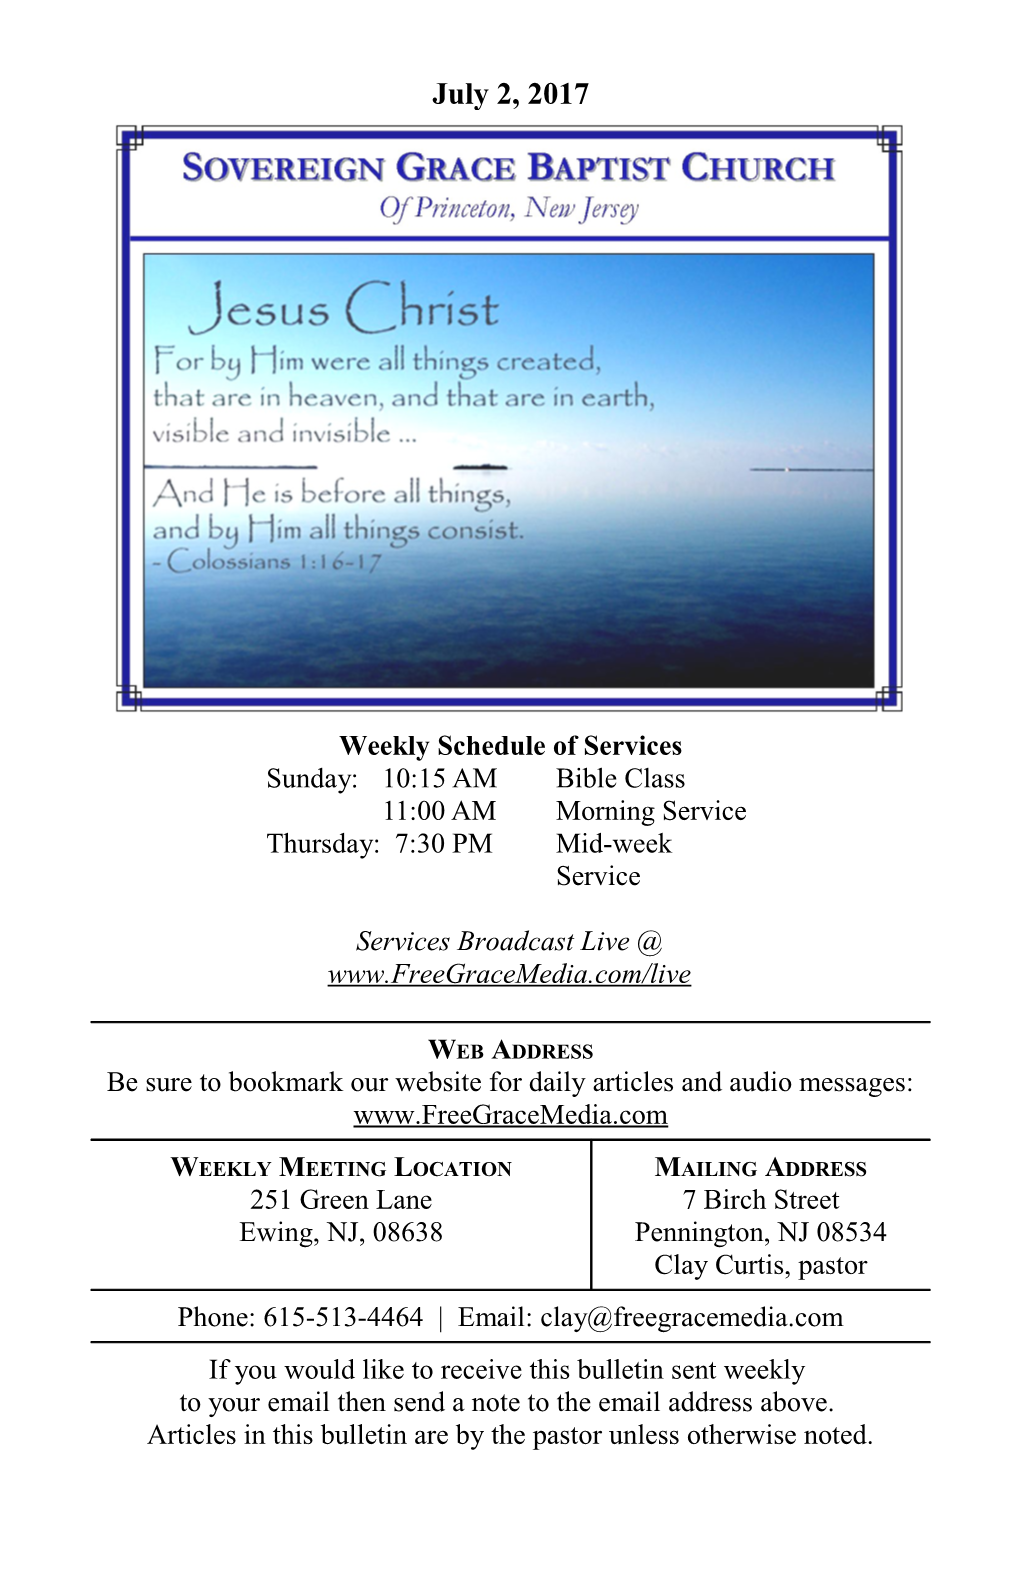 Weekly Schedule of Services s1